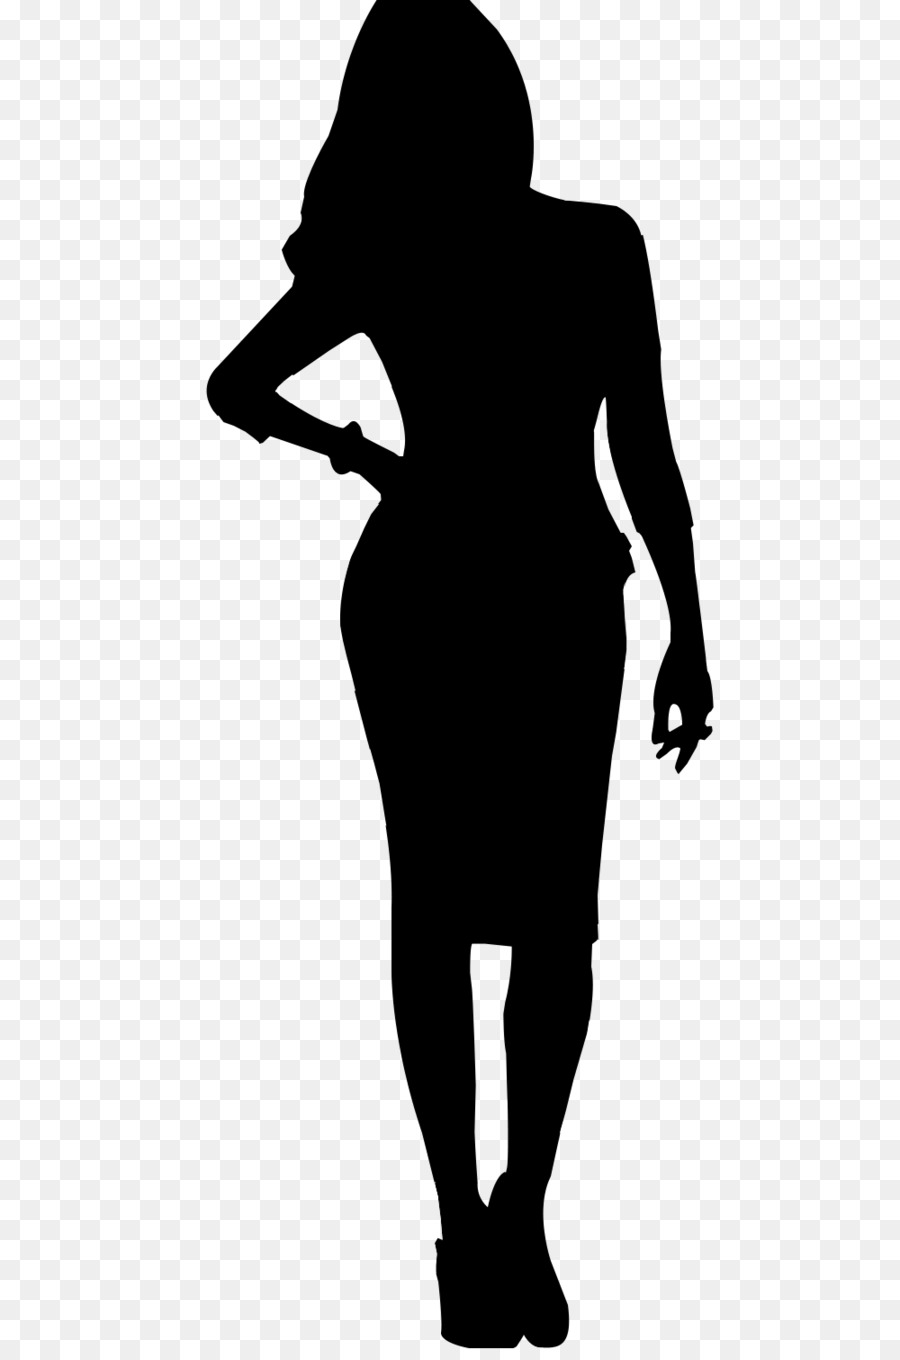 Free Standing Woman Silhouette, Download Free Standing Woman Silhouette ...